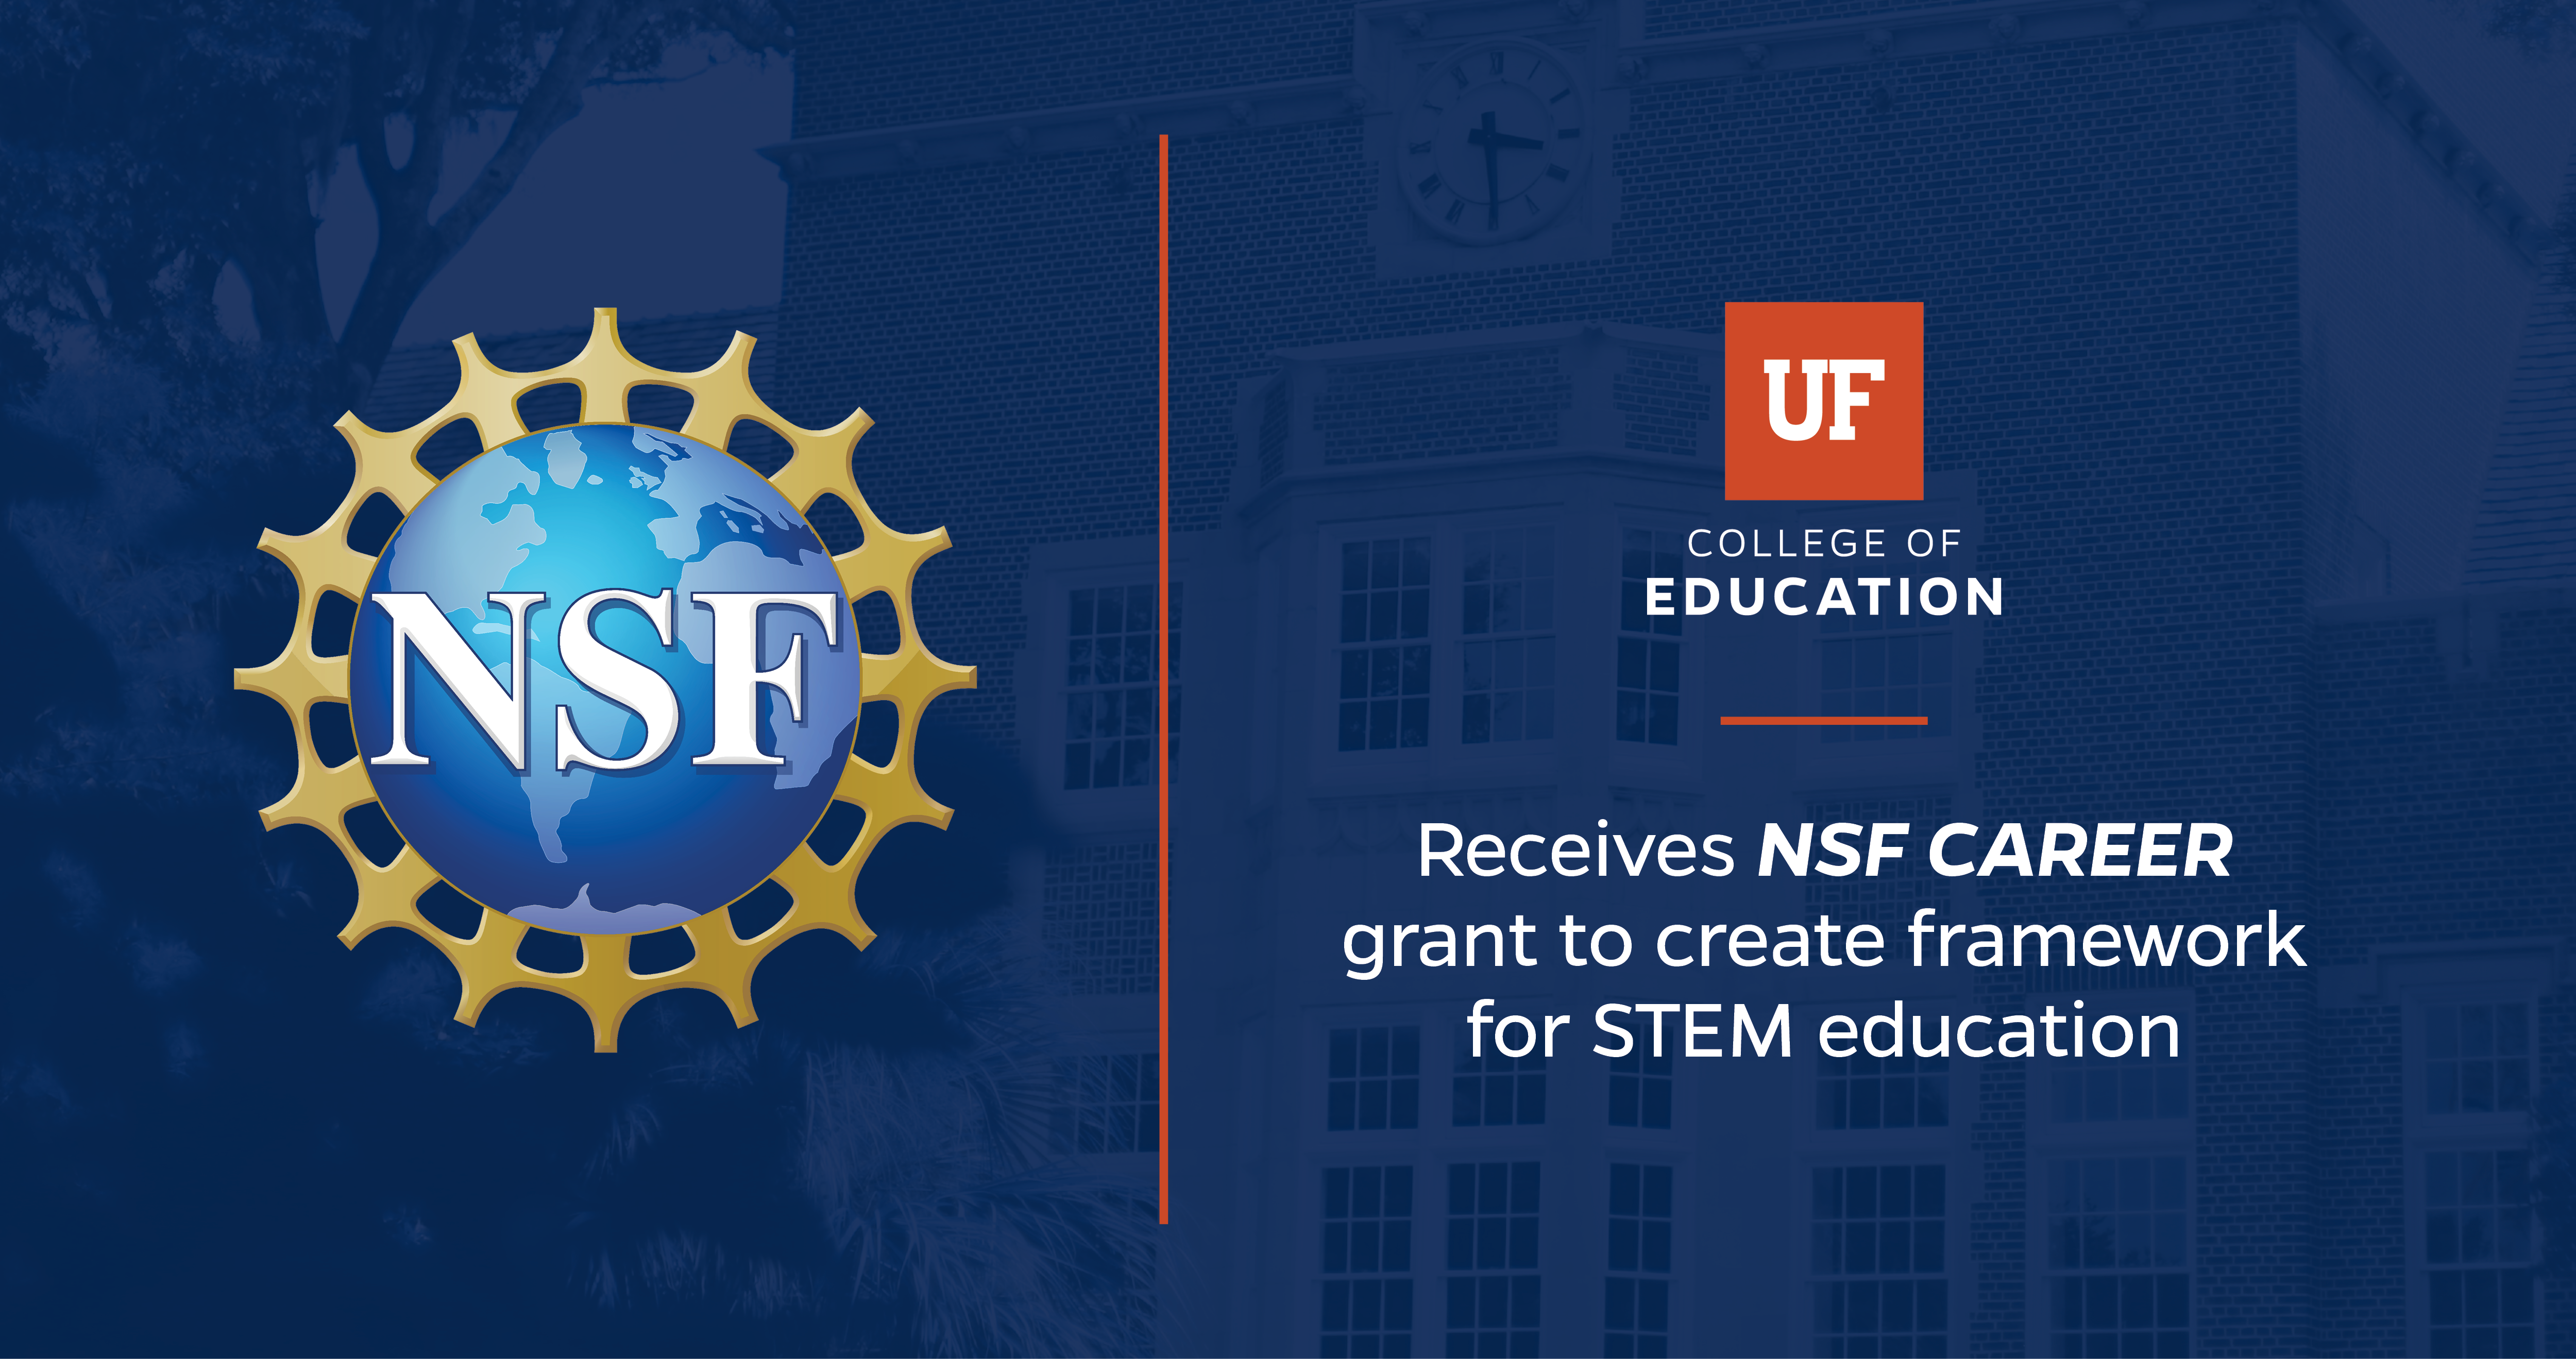 NSF CAREER grant awarded to the UF College of Education